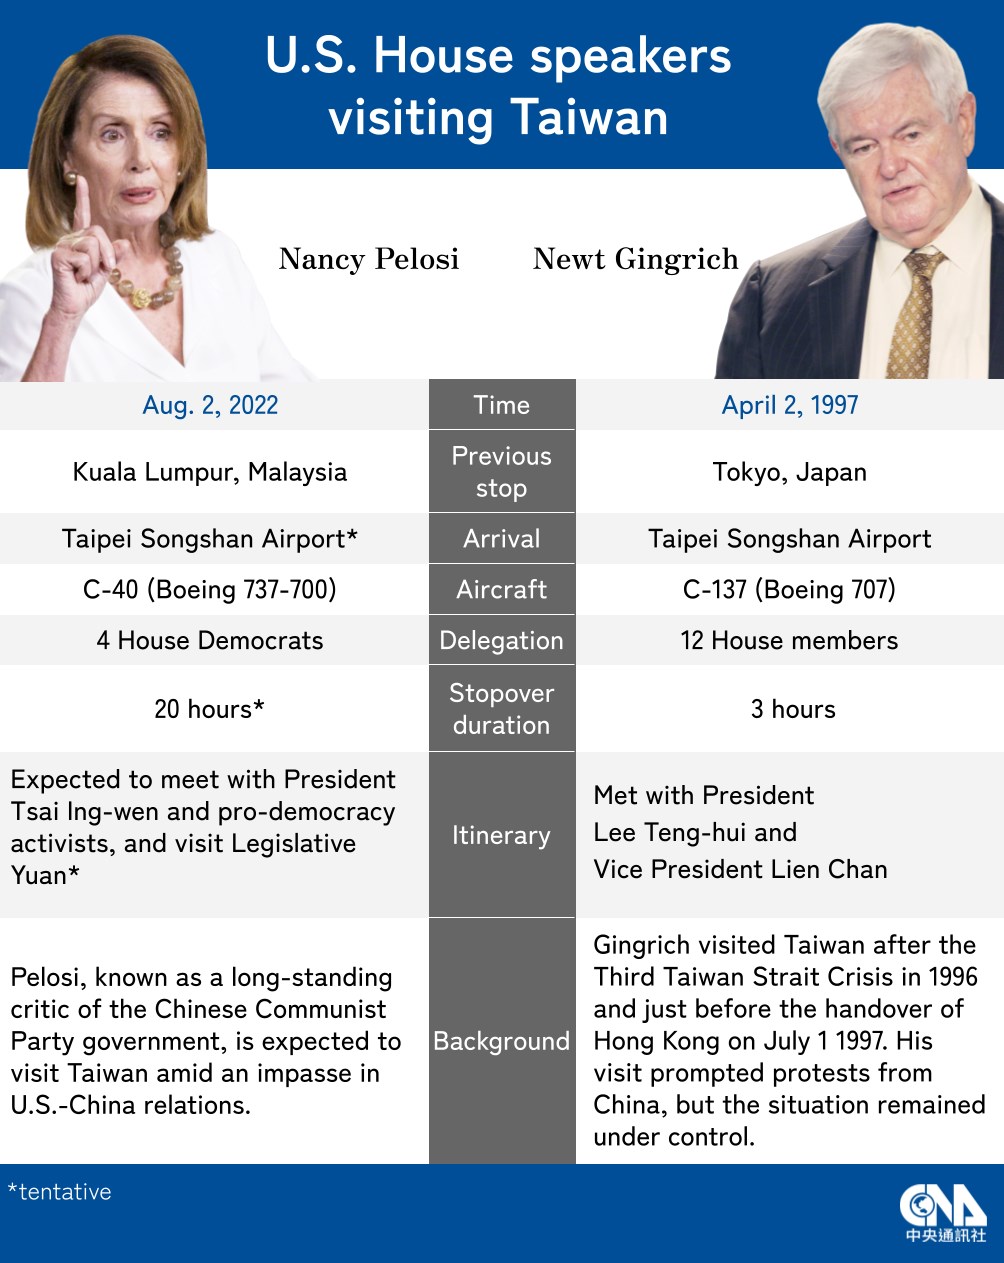 Chinese rhetoric on Pelosi, Gingrich visits markedly different - Focus  Taiwan